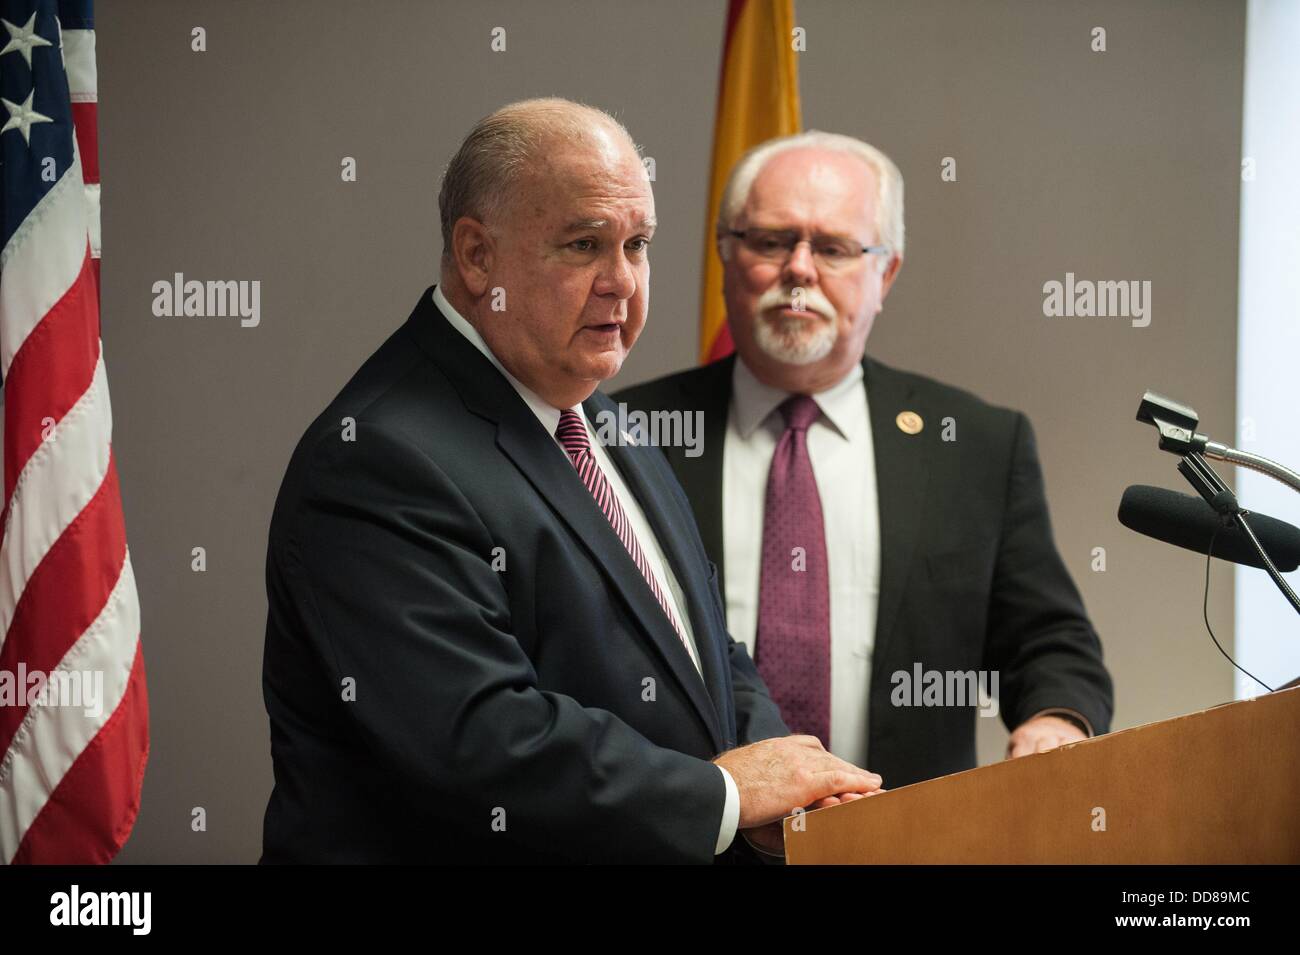 Tucson, Arizona, USA. 28th Aug, 2013. Under Secretary of the Army JOSEPH WESTPHAL, left, and Rep. RON BARBER (D-Ariz.), right, are in Barber's Southern Arizona district to tour military facilities and defense contractor plants. The men held a press conference at Tucson International Airport in Tucson, Ariz. after Westphal's arrival. Barber said he is leading Westphal's tour to make sure Westphal has an understanding of the importance of the military in Barber's district. Westphal said at this point there are no Administration plans for base realignment and closure programs becaus Stock Photo